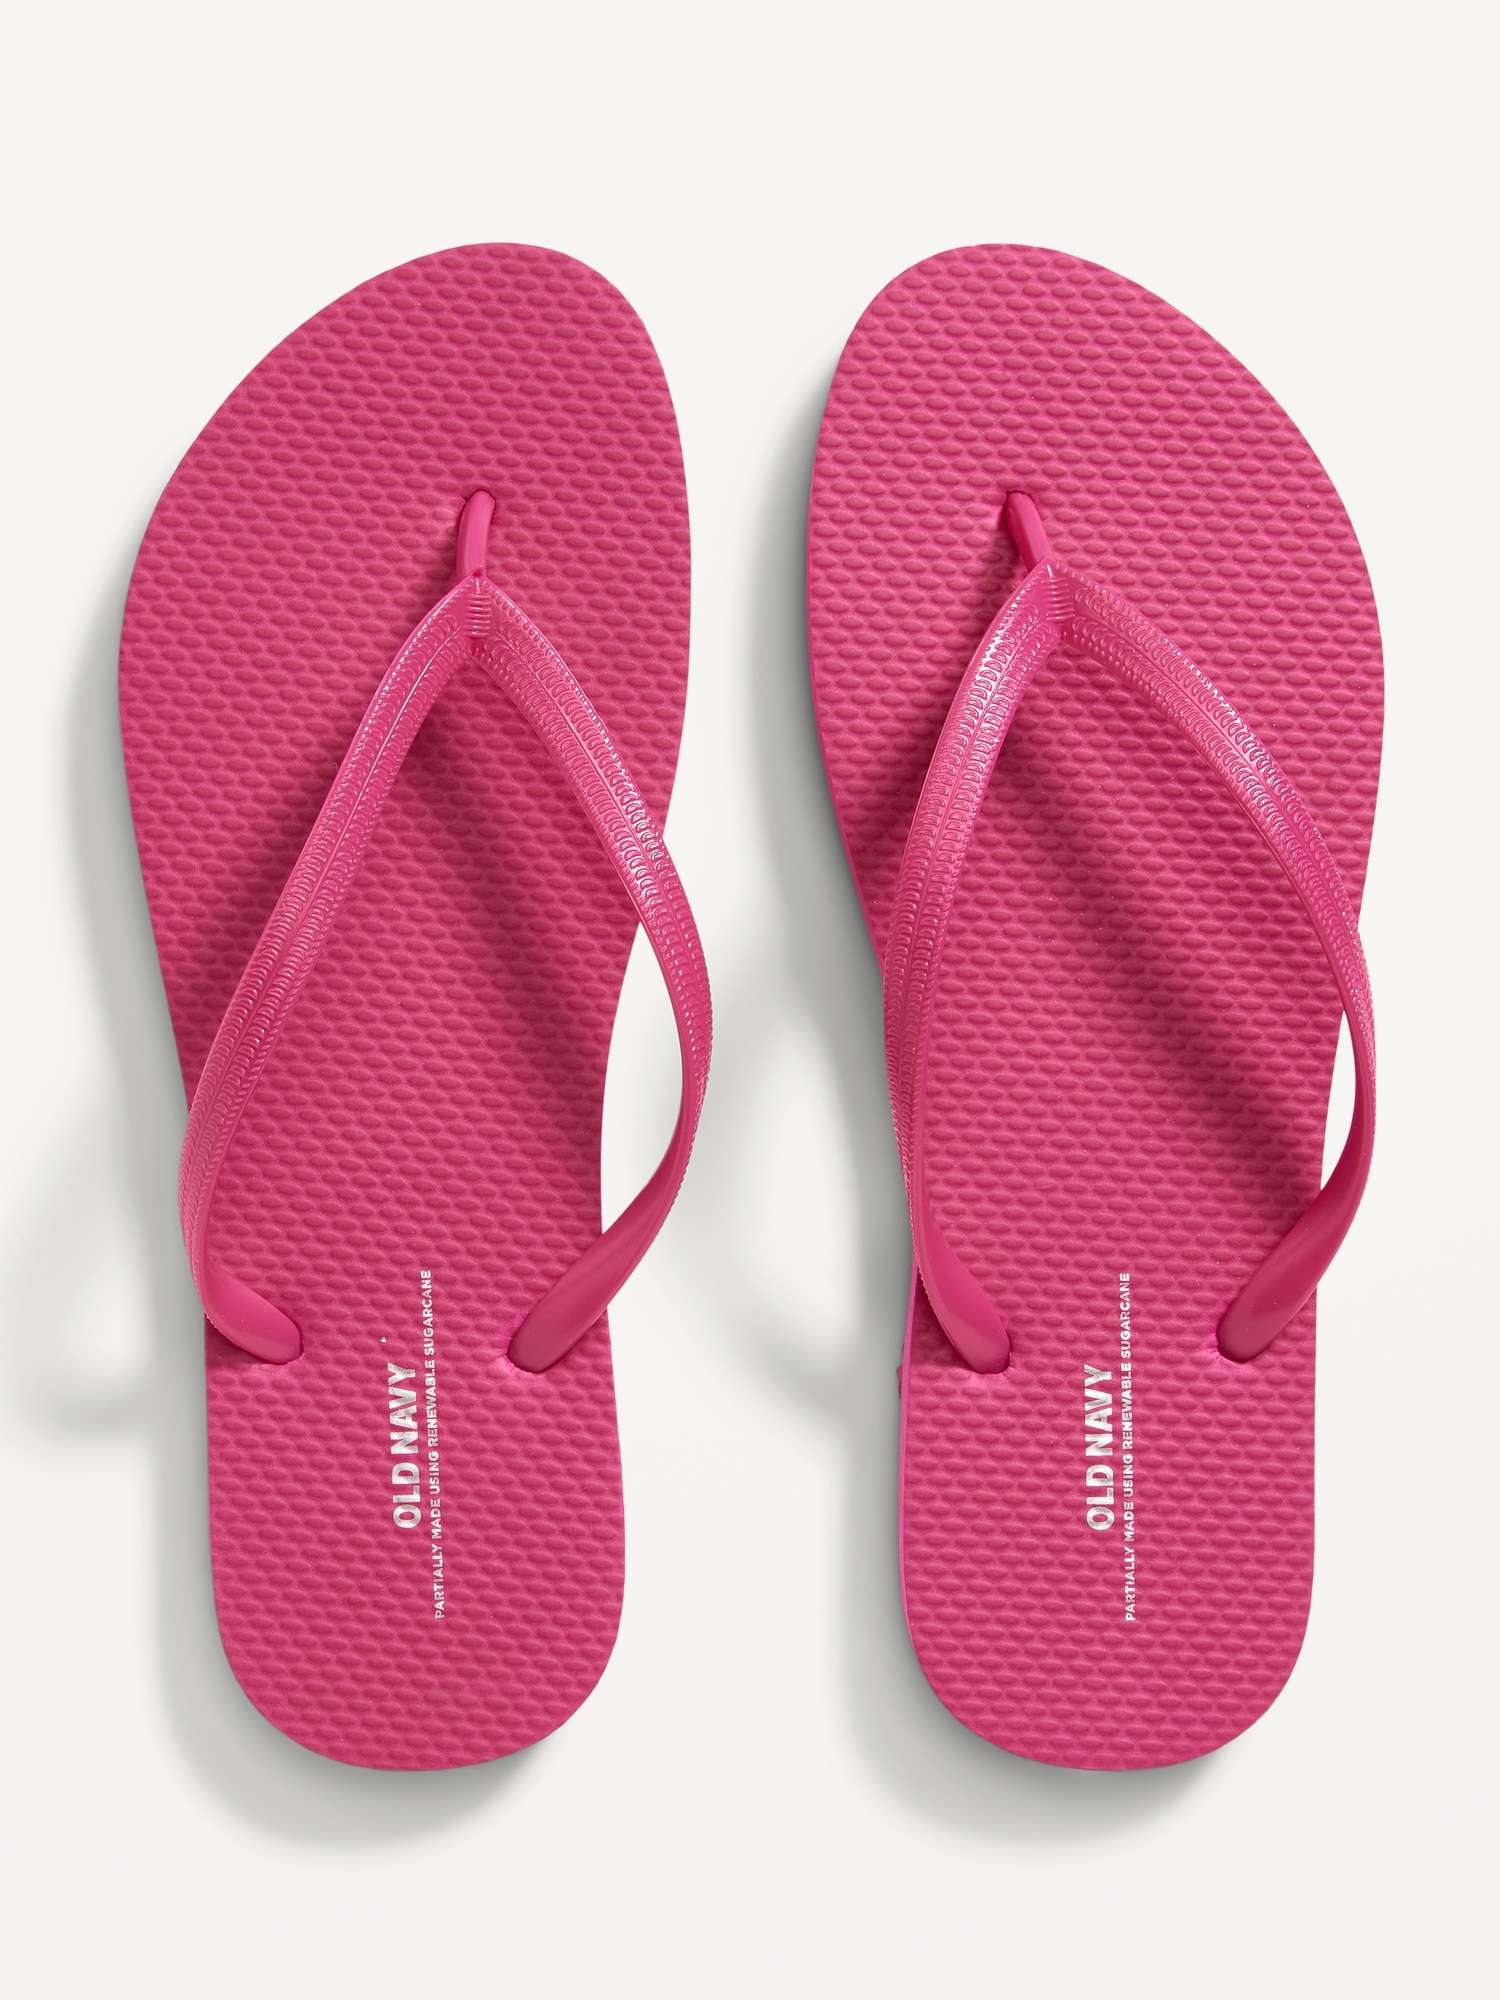 Flip-Flop Sandals for Women (Partially | Old Navy